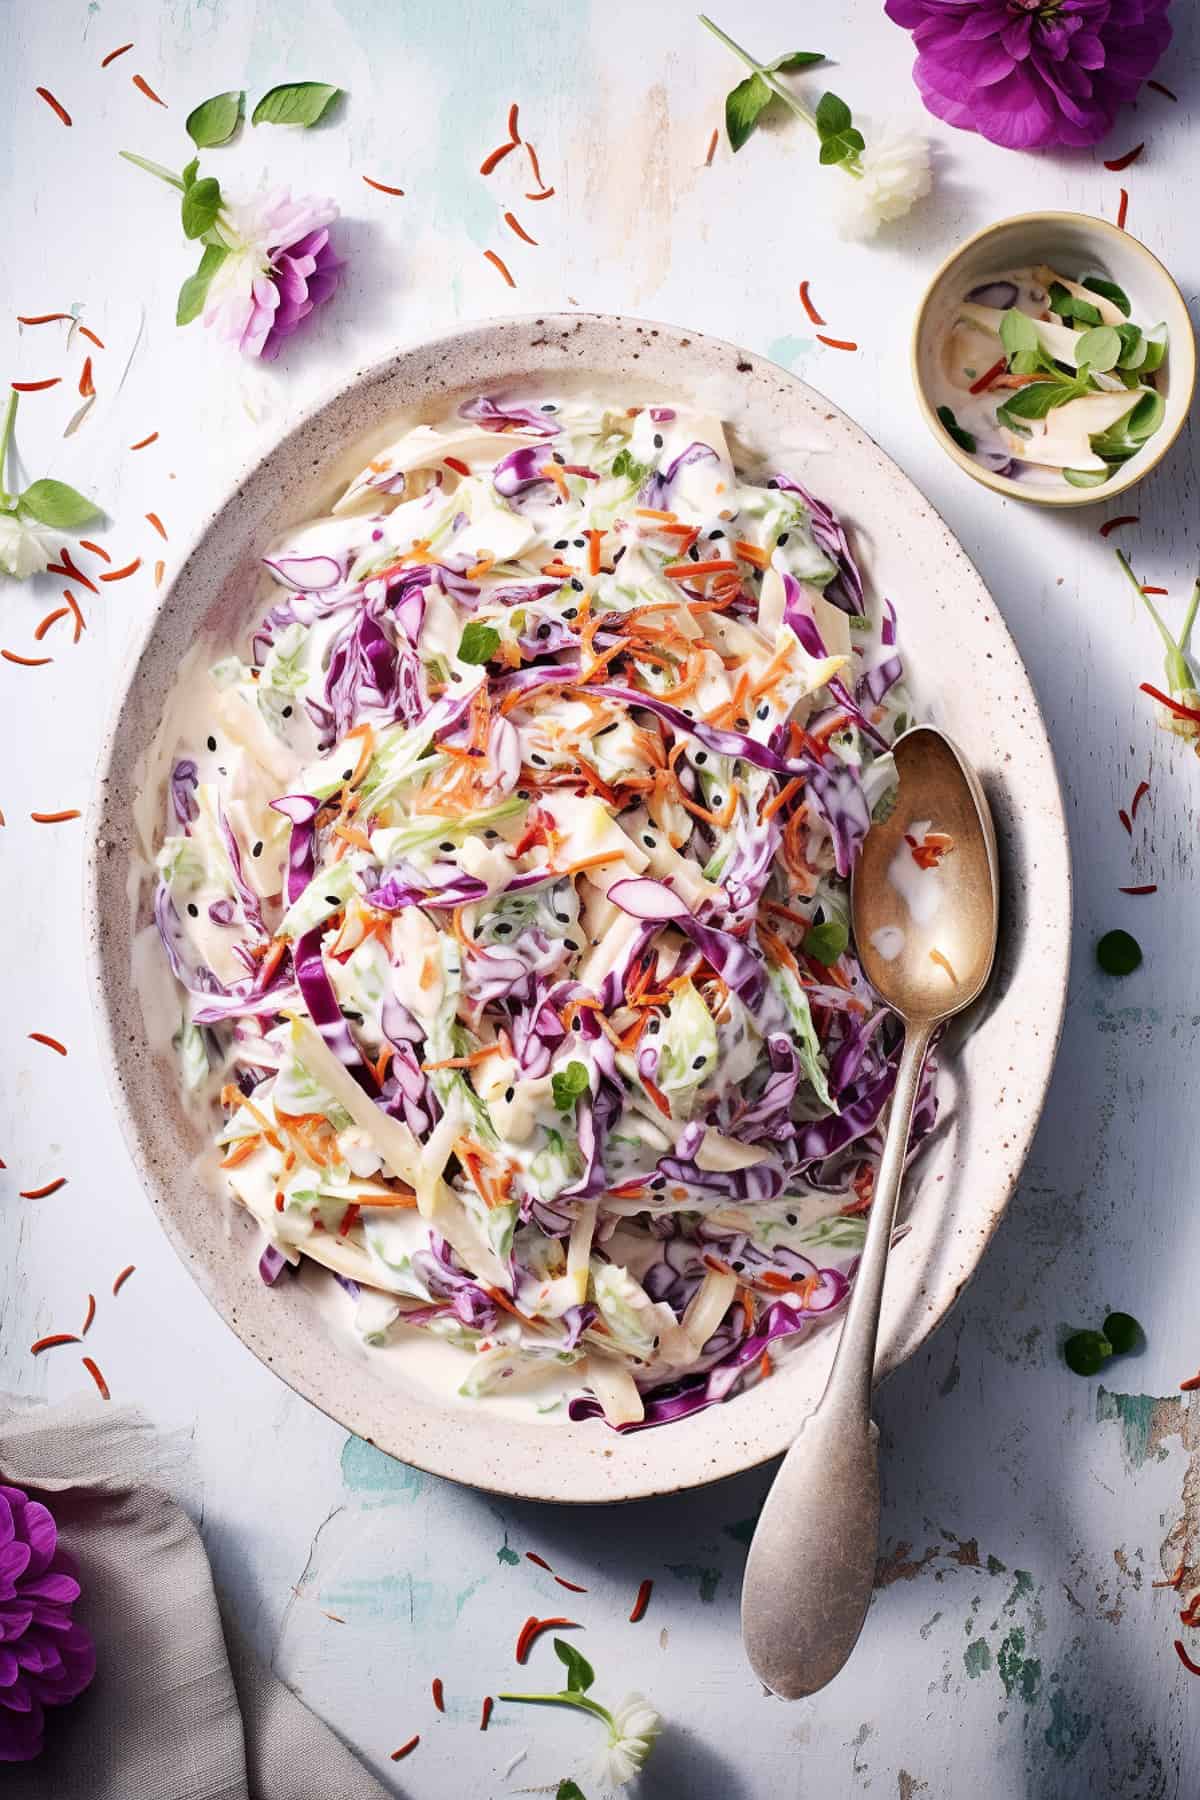 Jamie Oliver's coleslaw on a white plate.